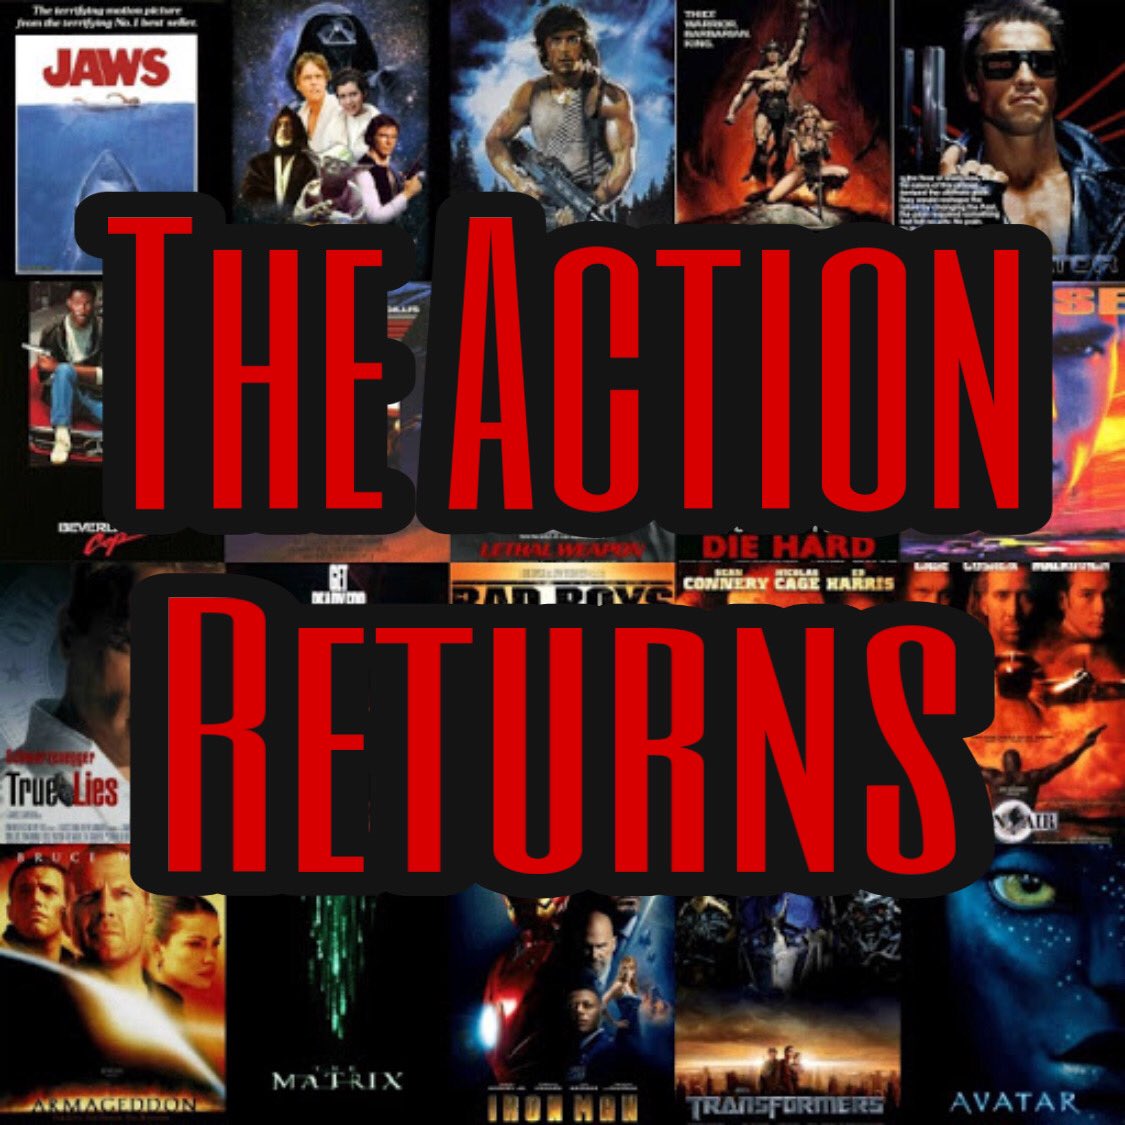 Subscribe & download to hear all of our new & past episodes of #TheActionReturns!

#TheHorrorReturns #THRPodcastNetwork #Action #ActionMovies #ActionSeries #ActionMoviePodcast #Podcast #Podcasting #PodLife #PodernFamily #PodcastHQ #PodNation

iheart.com/podcast/256-th…